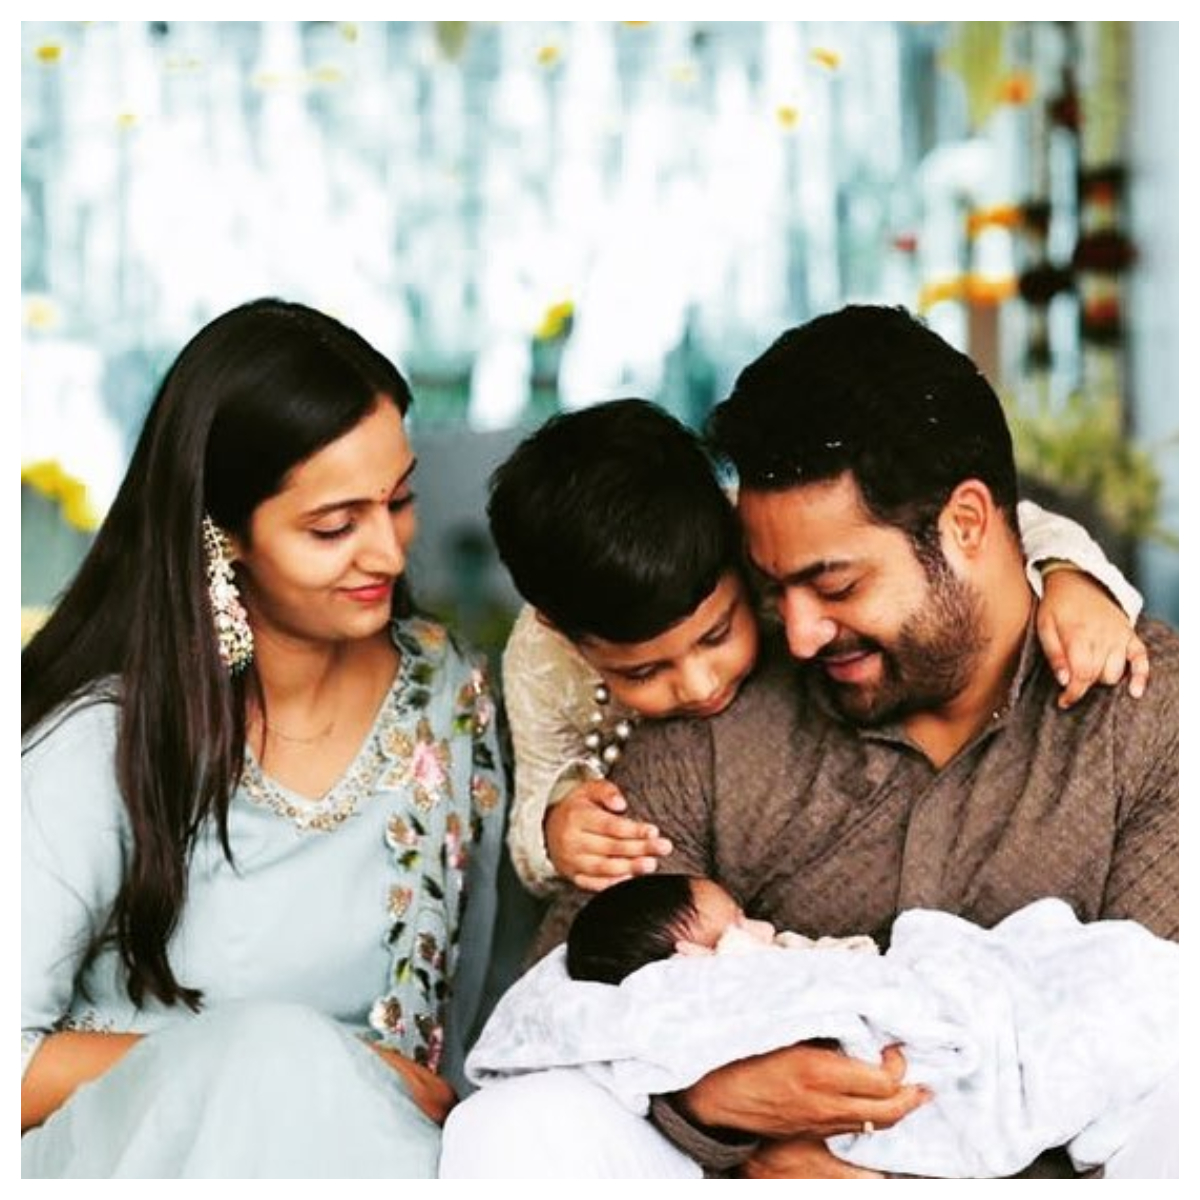 PHOTOS: Jr NTR and his wife Lakshmi Pranathi's arranged marriage love story will make your heart flutter | PINKVILLA